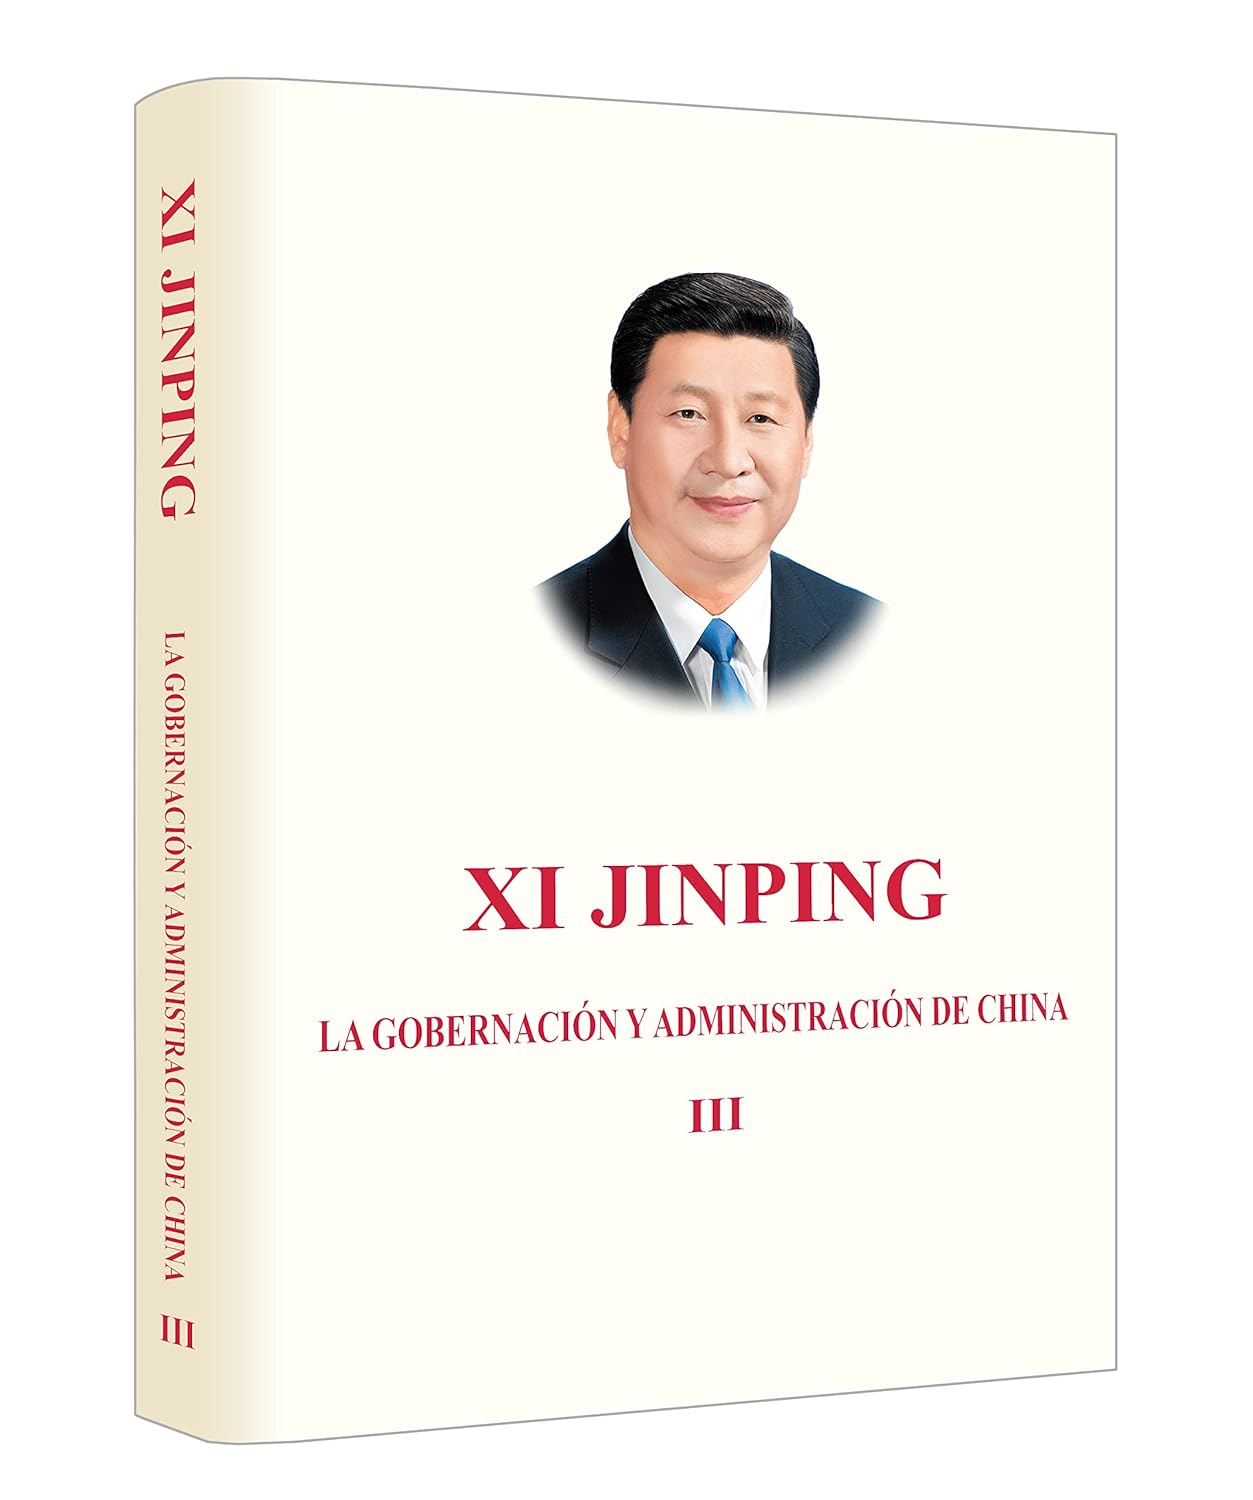 Xi Jinping: The Governance of China Vol. 3 (Spanish) - Hardcover